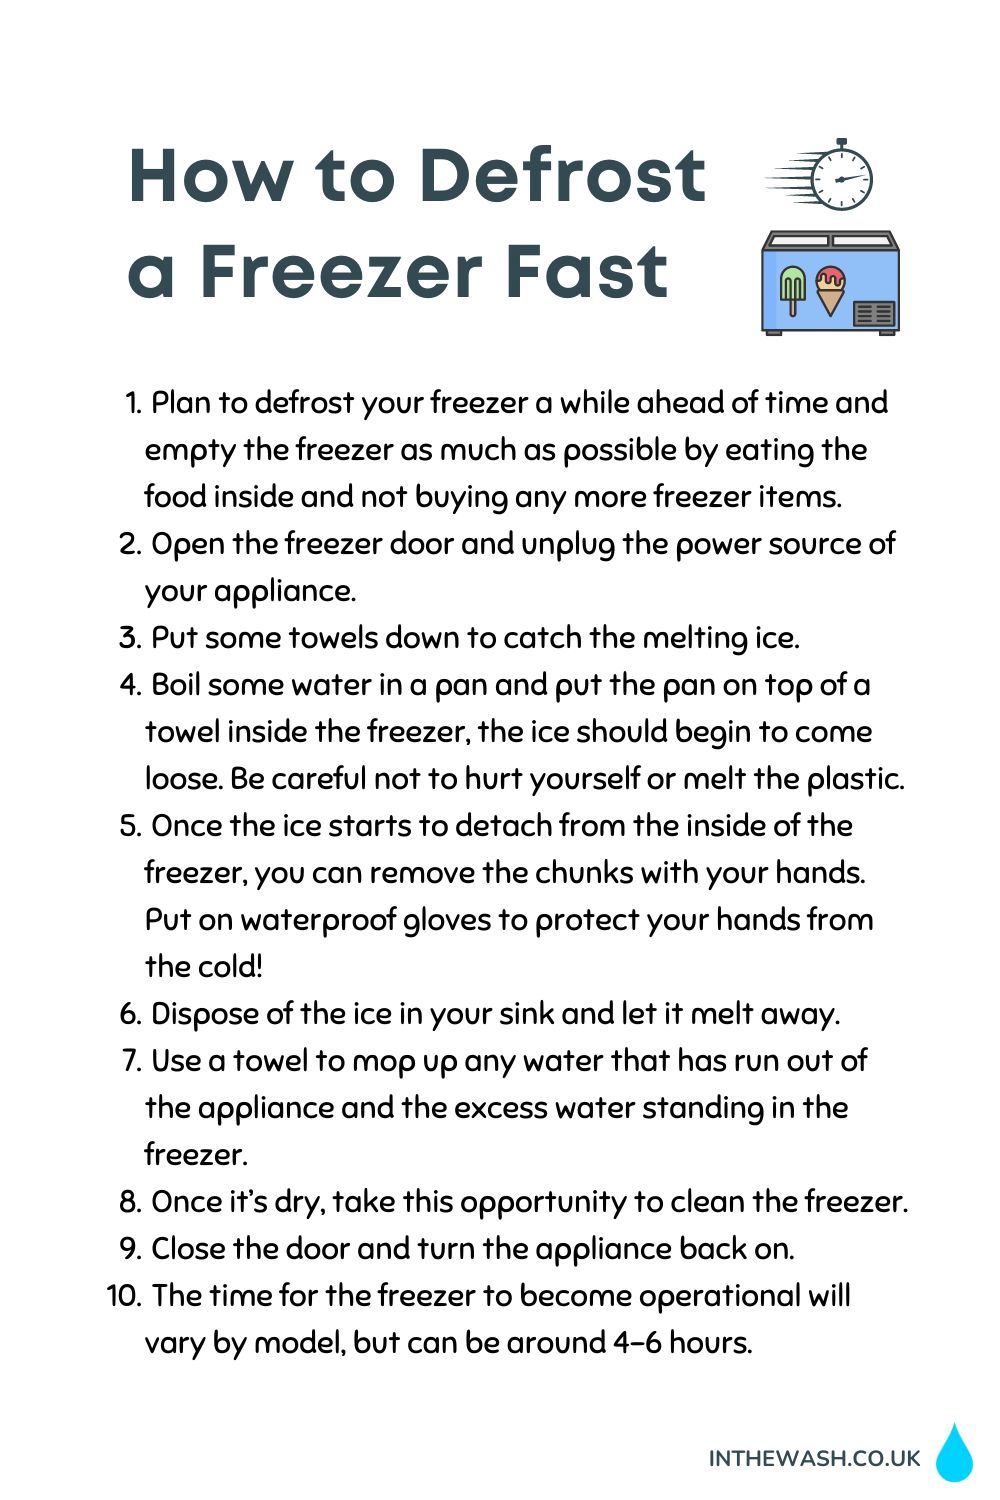 How to defrost a freezer fast